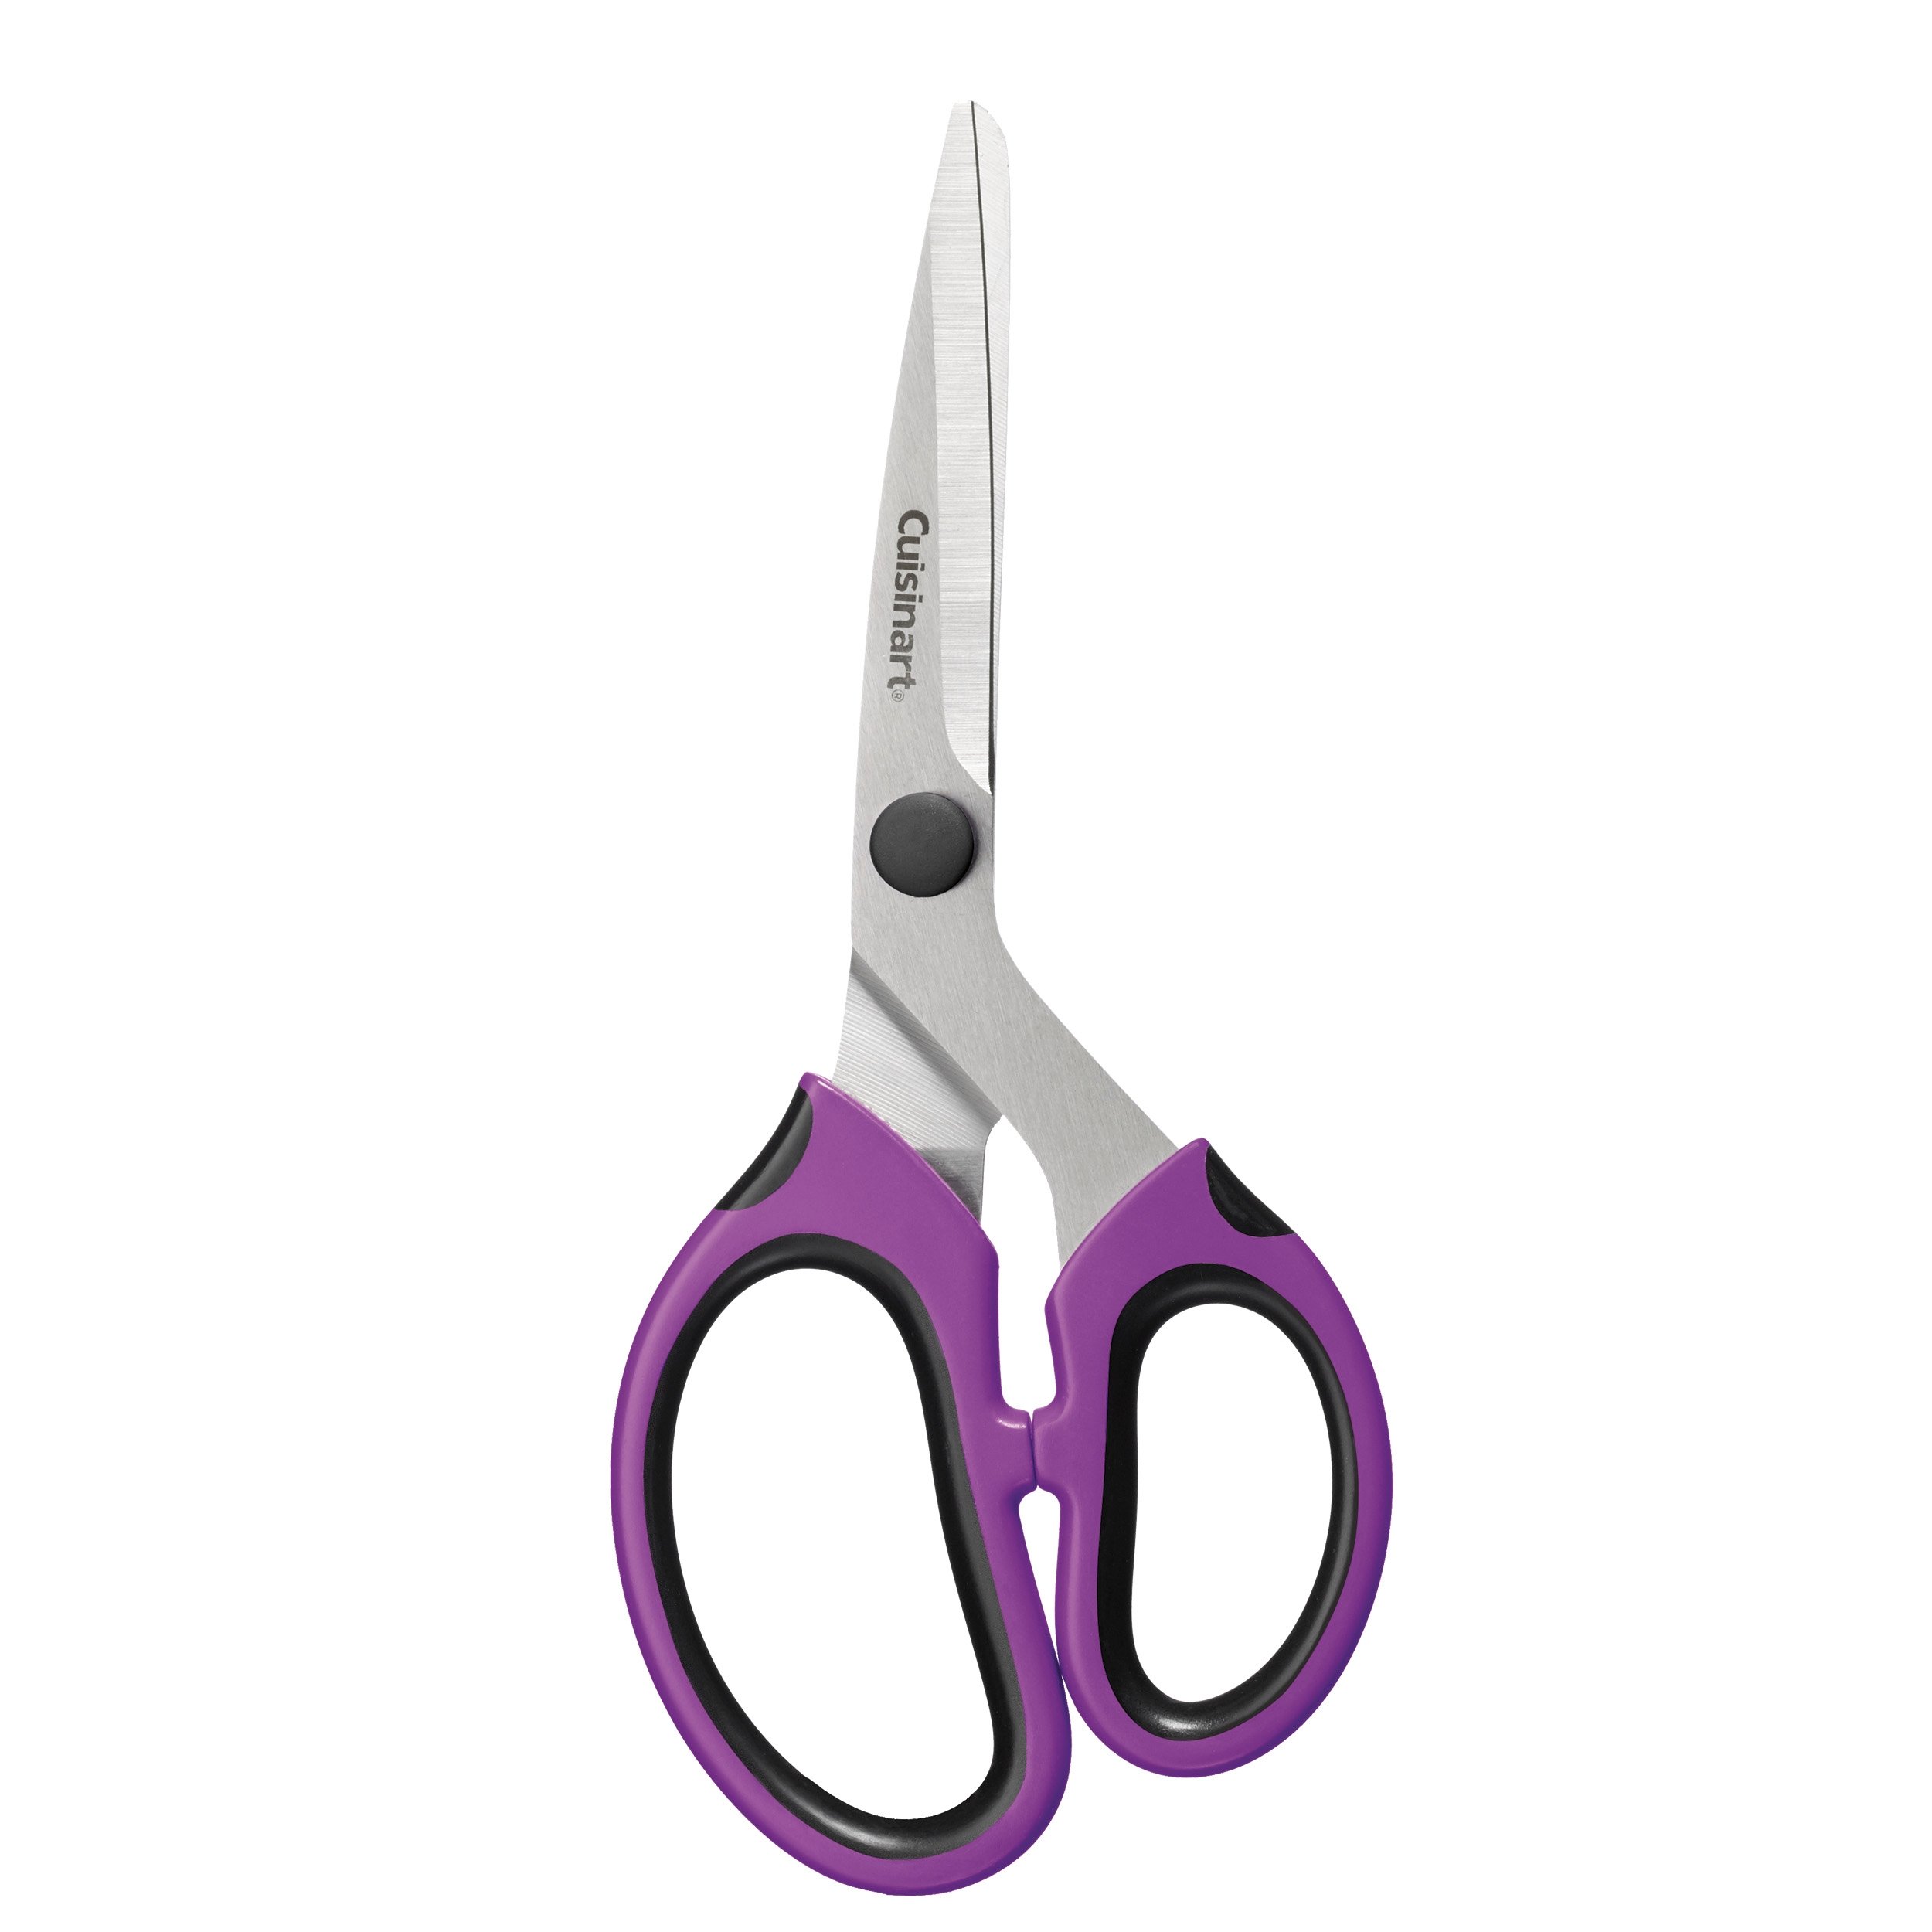 8.5 Offset Utility Shears with Soft-Grip Handles